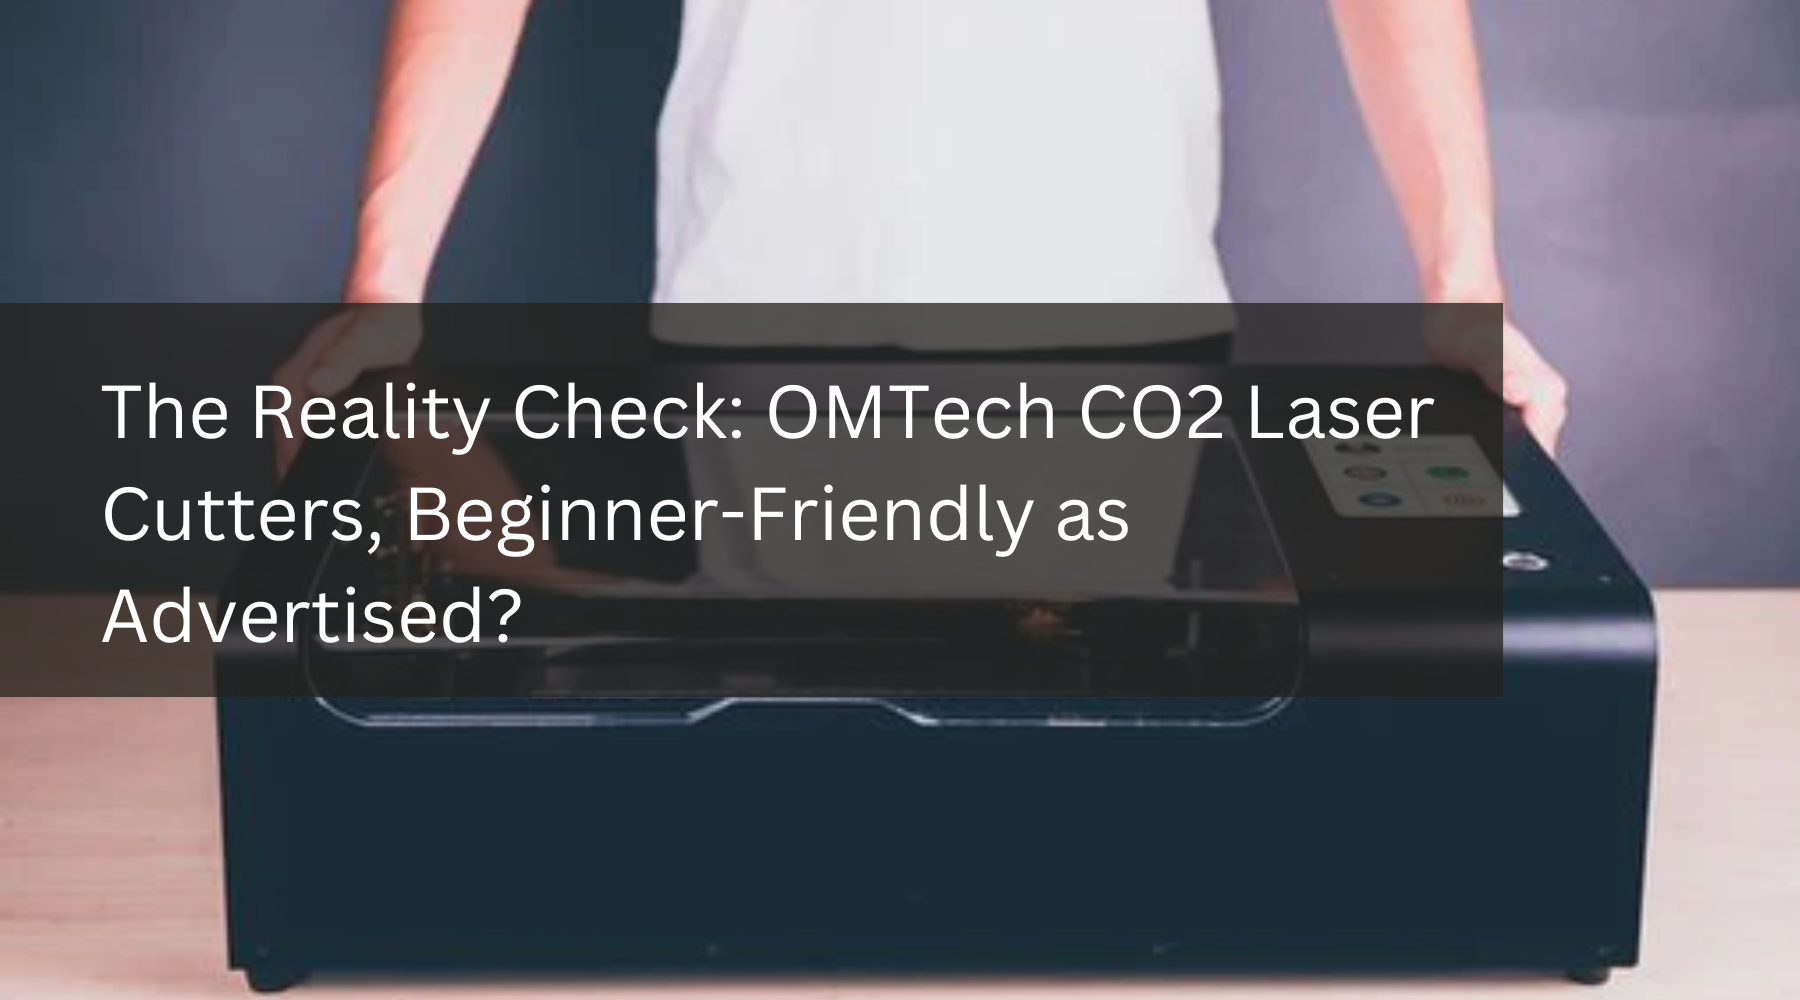 The Reality Check: OMTech CO2 Laser Cutters, Beginner-Friendly as Advertised?